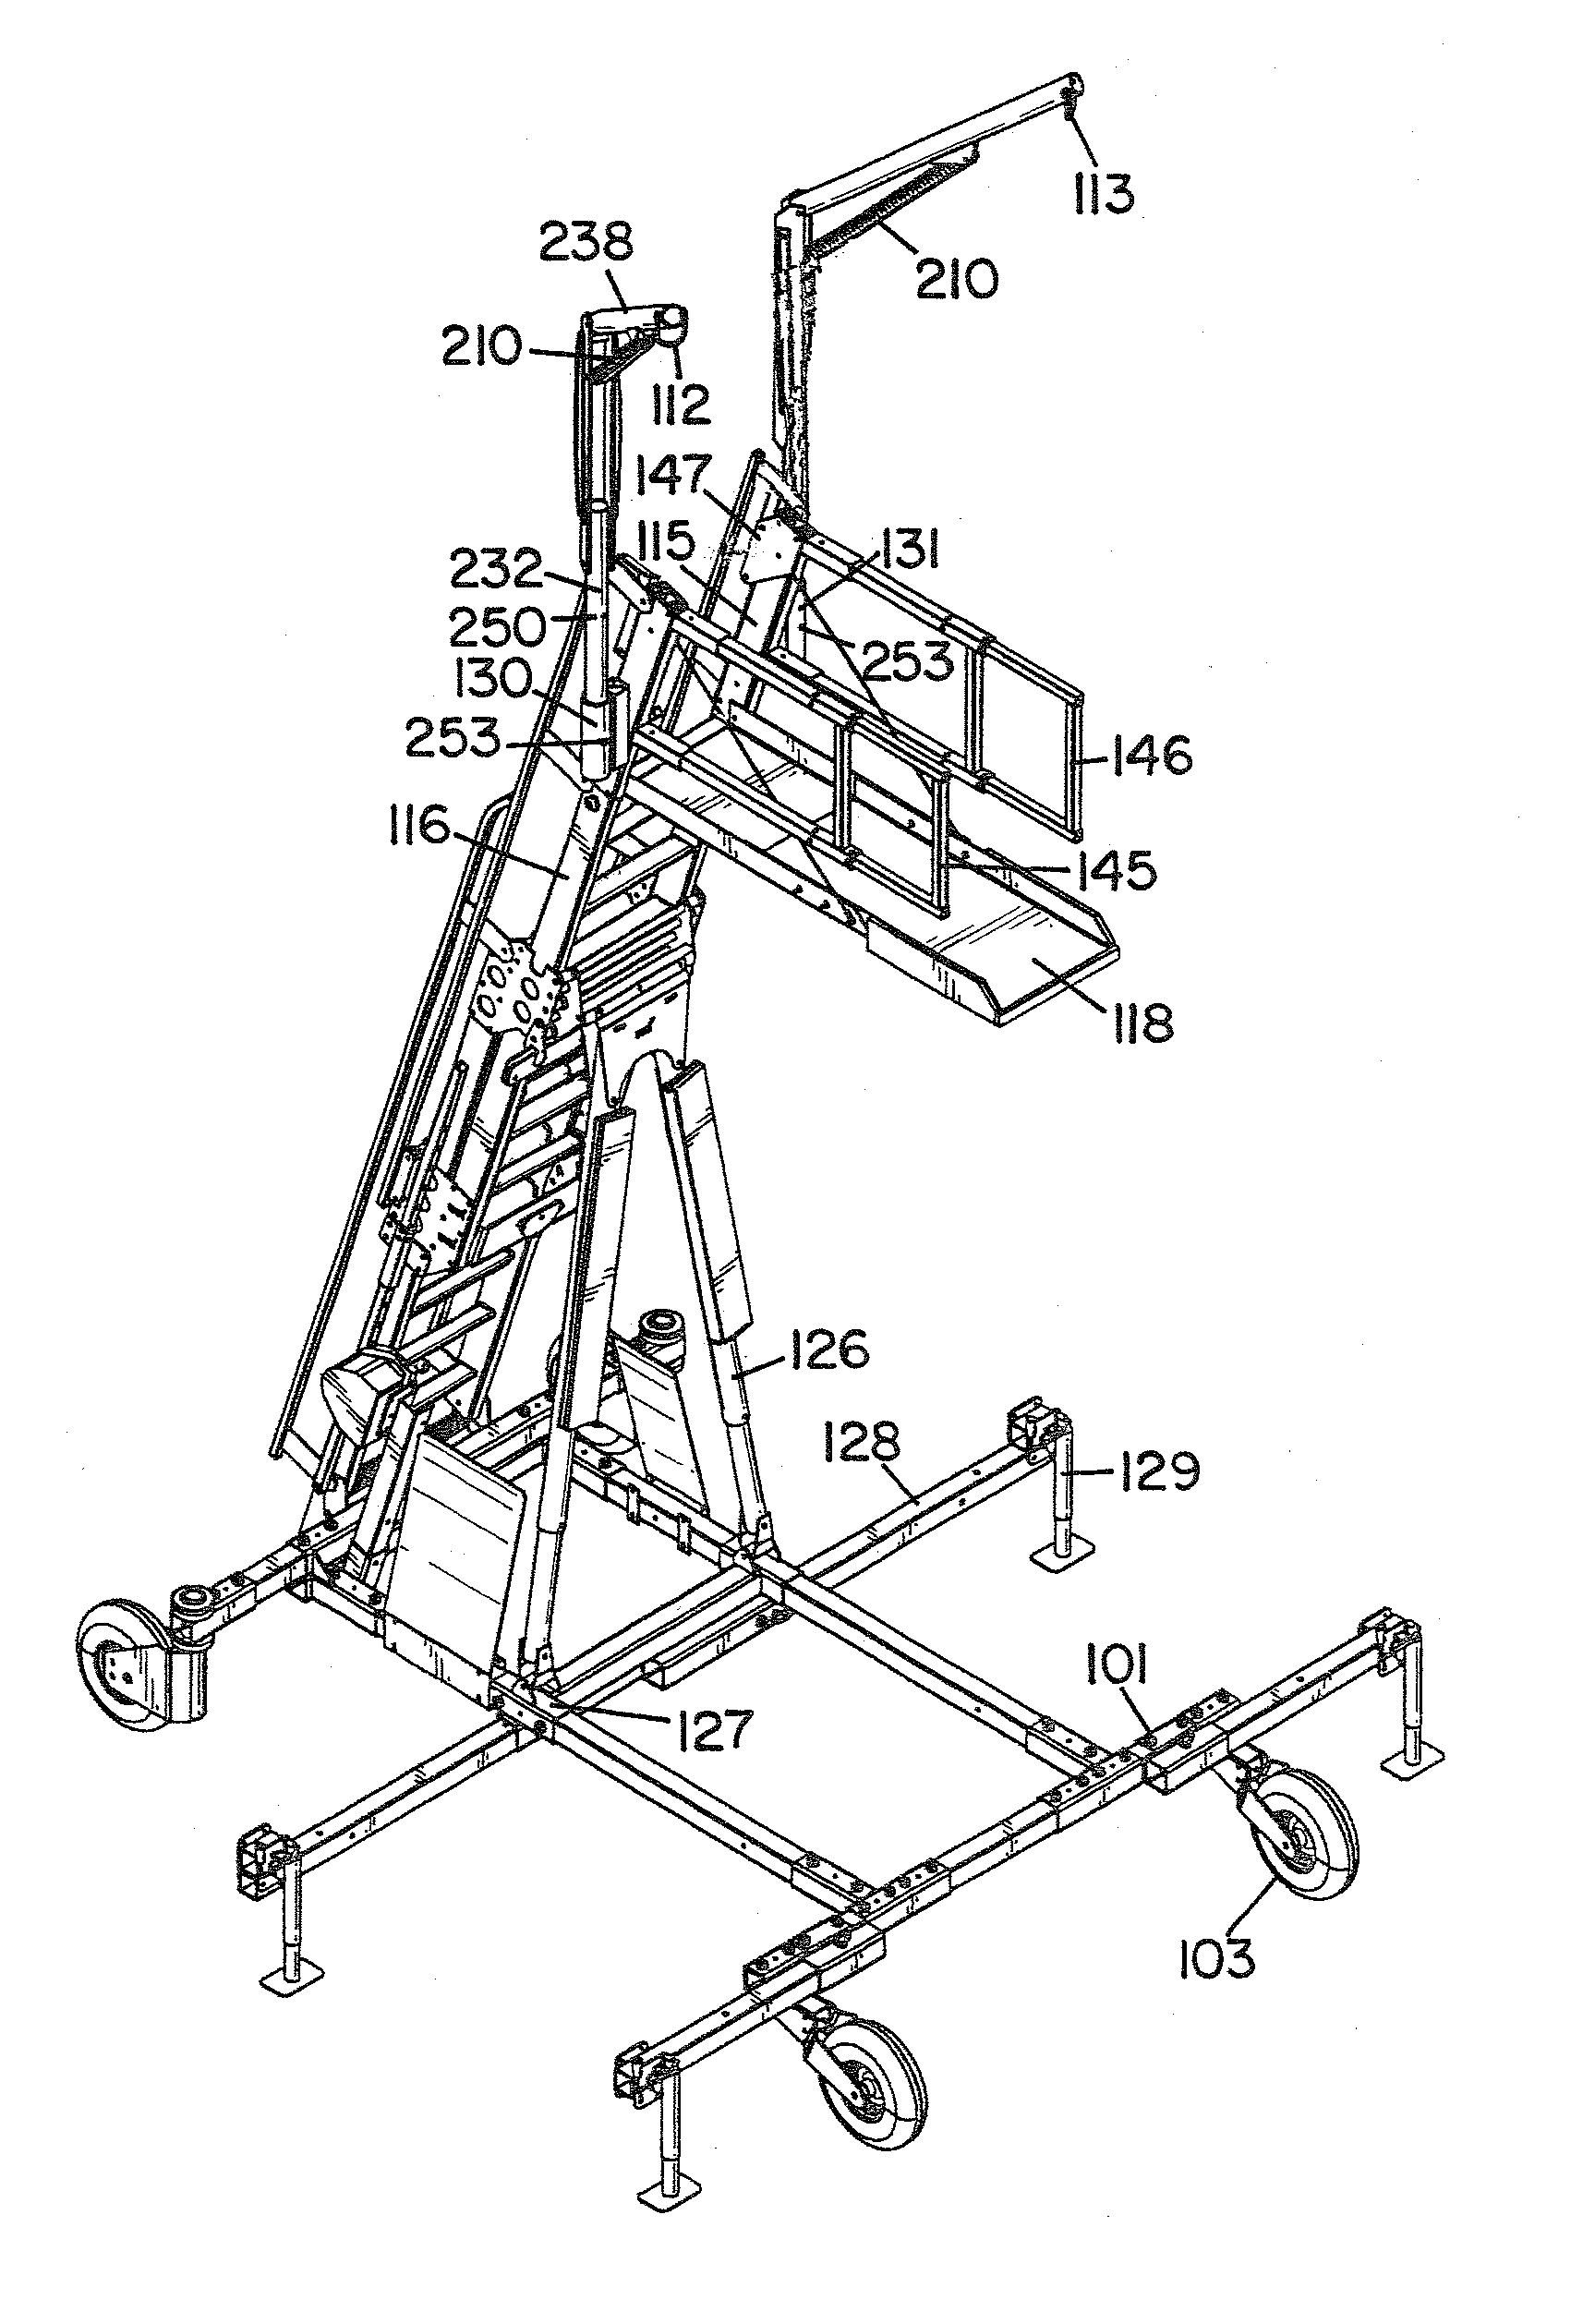 Mobile mount for attachment of a fall arrest system